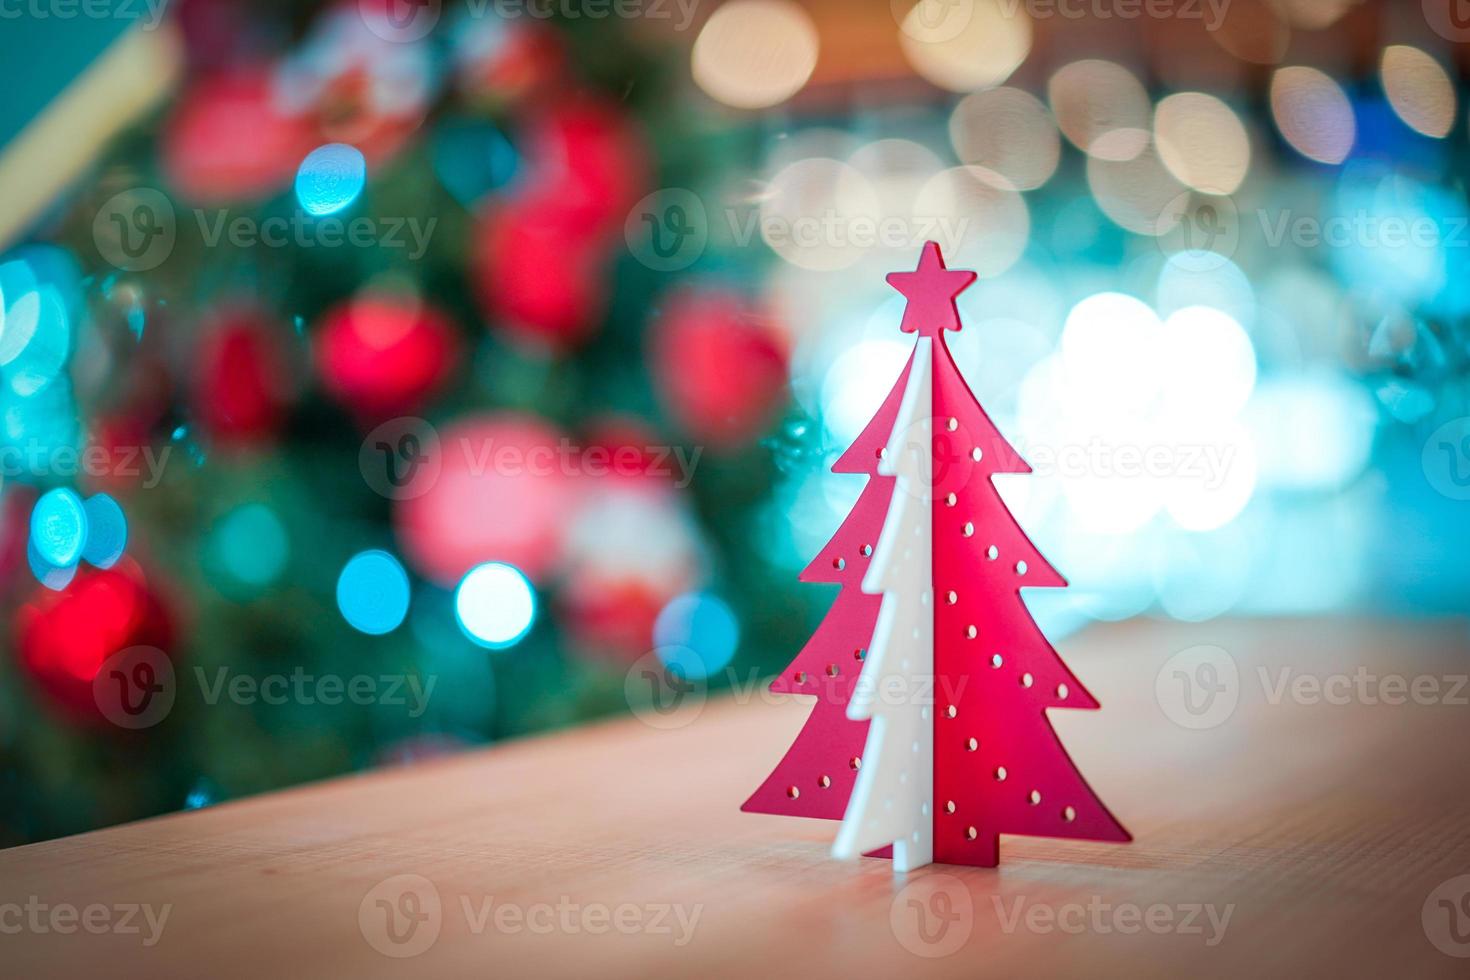 Plastic red and white Christmas tree decoration on the wood table with blur big Christmas tree behide. photo